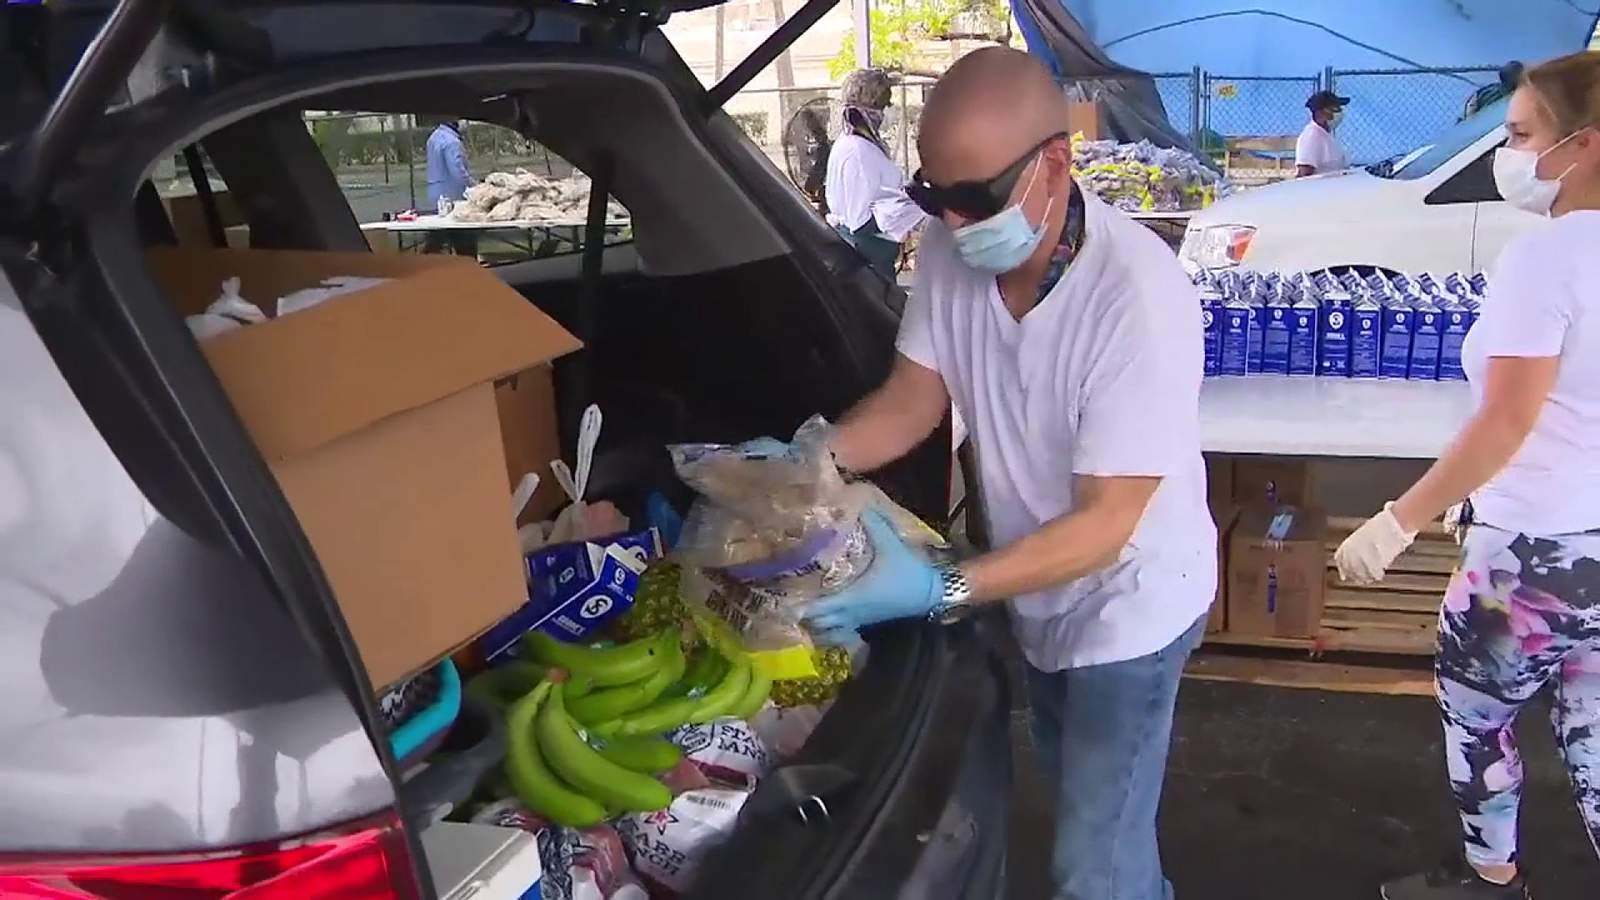 Food distribution sites getting busier as need increases